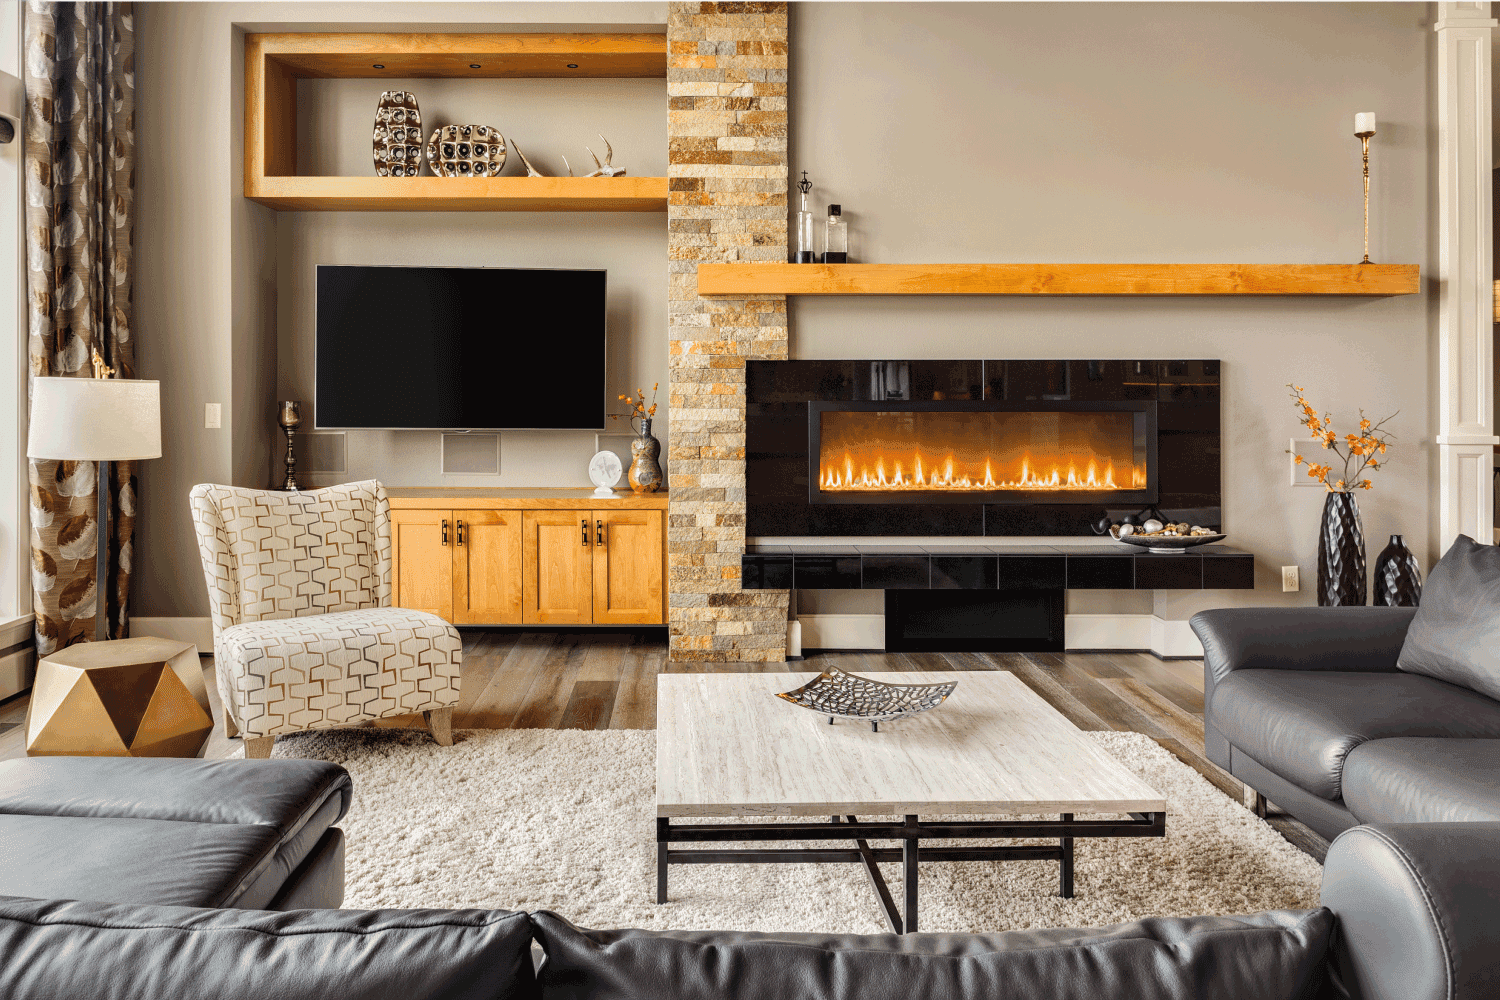 Furnished living Room in Luxury Home with Roaring Fire in Fireplace